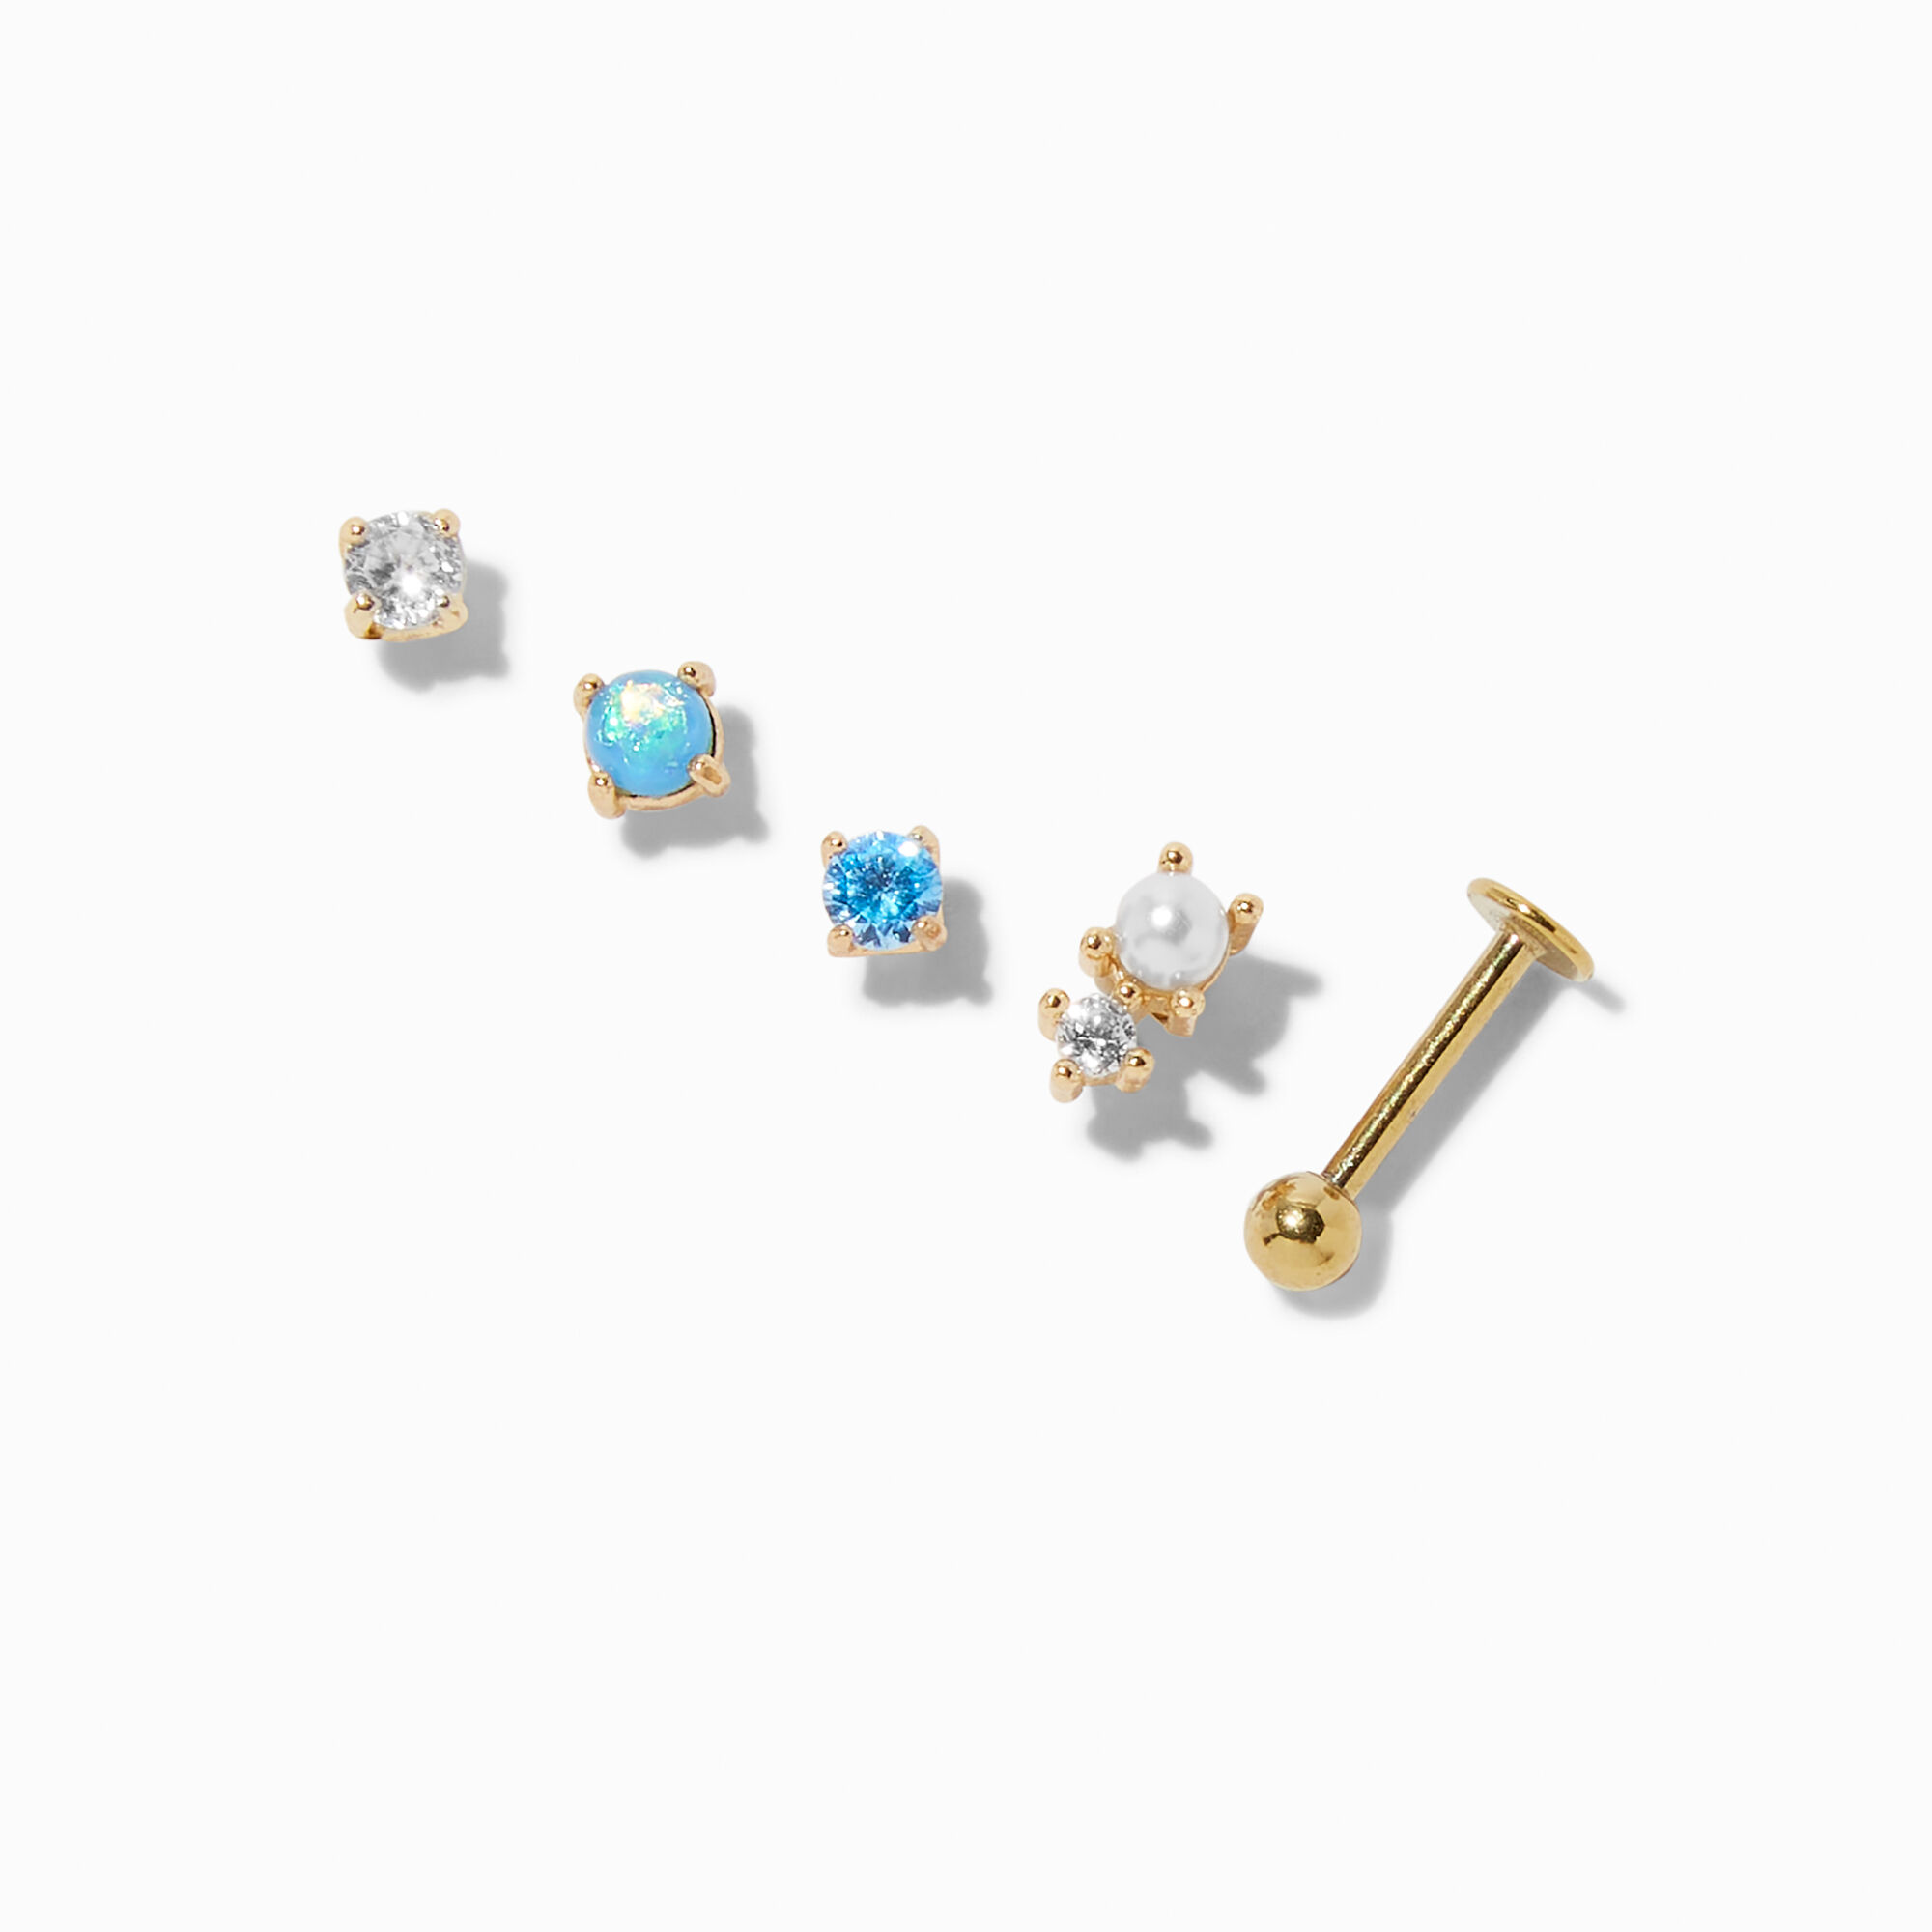 View Claires Tone Stainless Steel 16G Aqua Changeable Tragus Flat Back Earrings 5 Pack Gold information